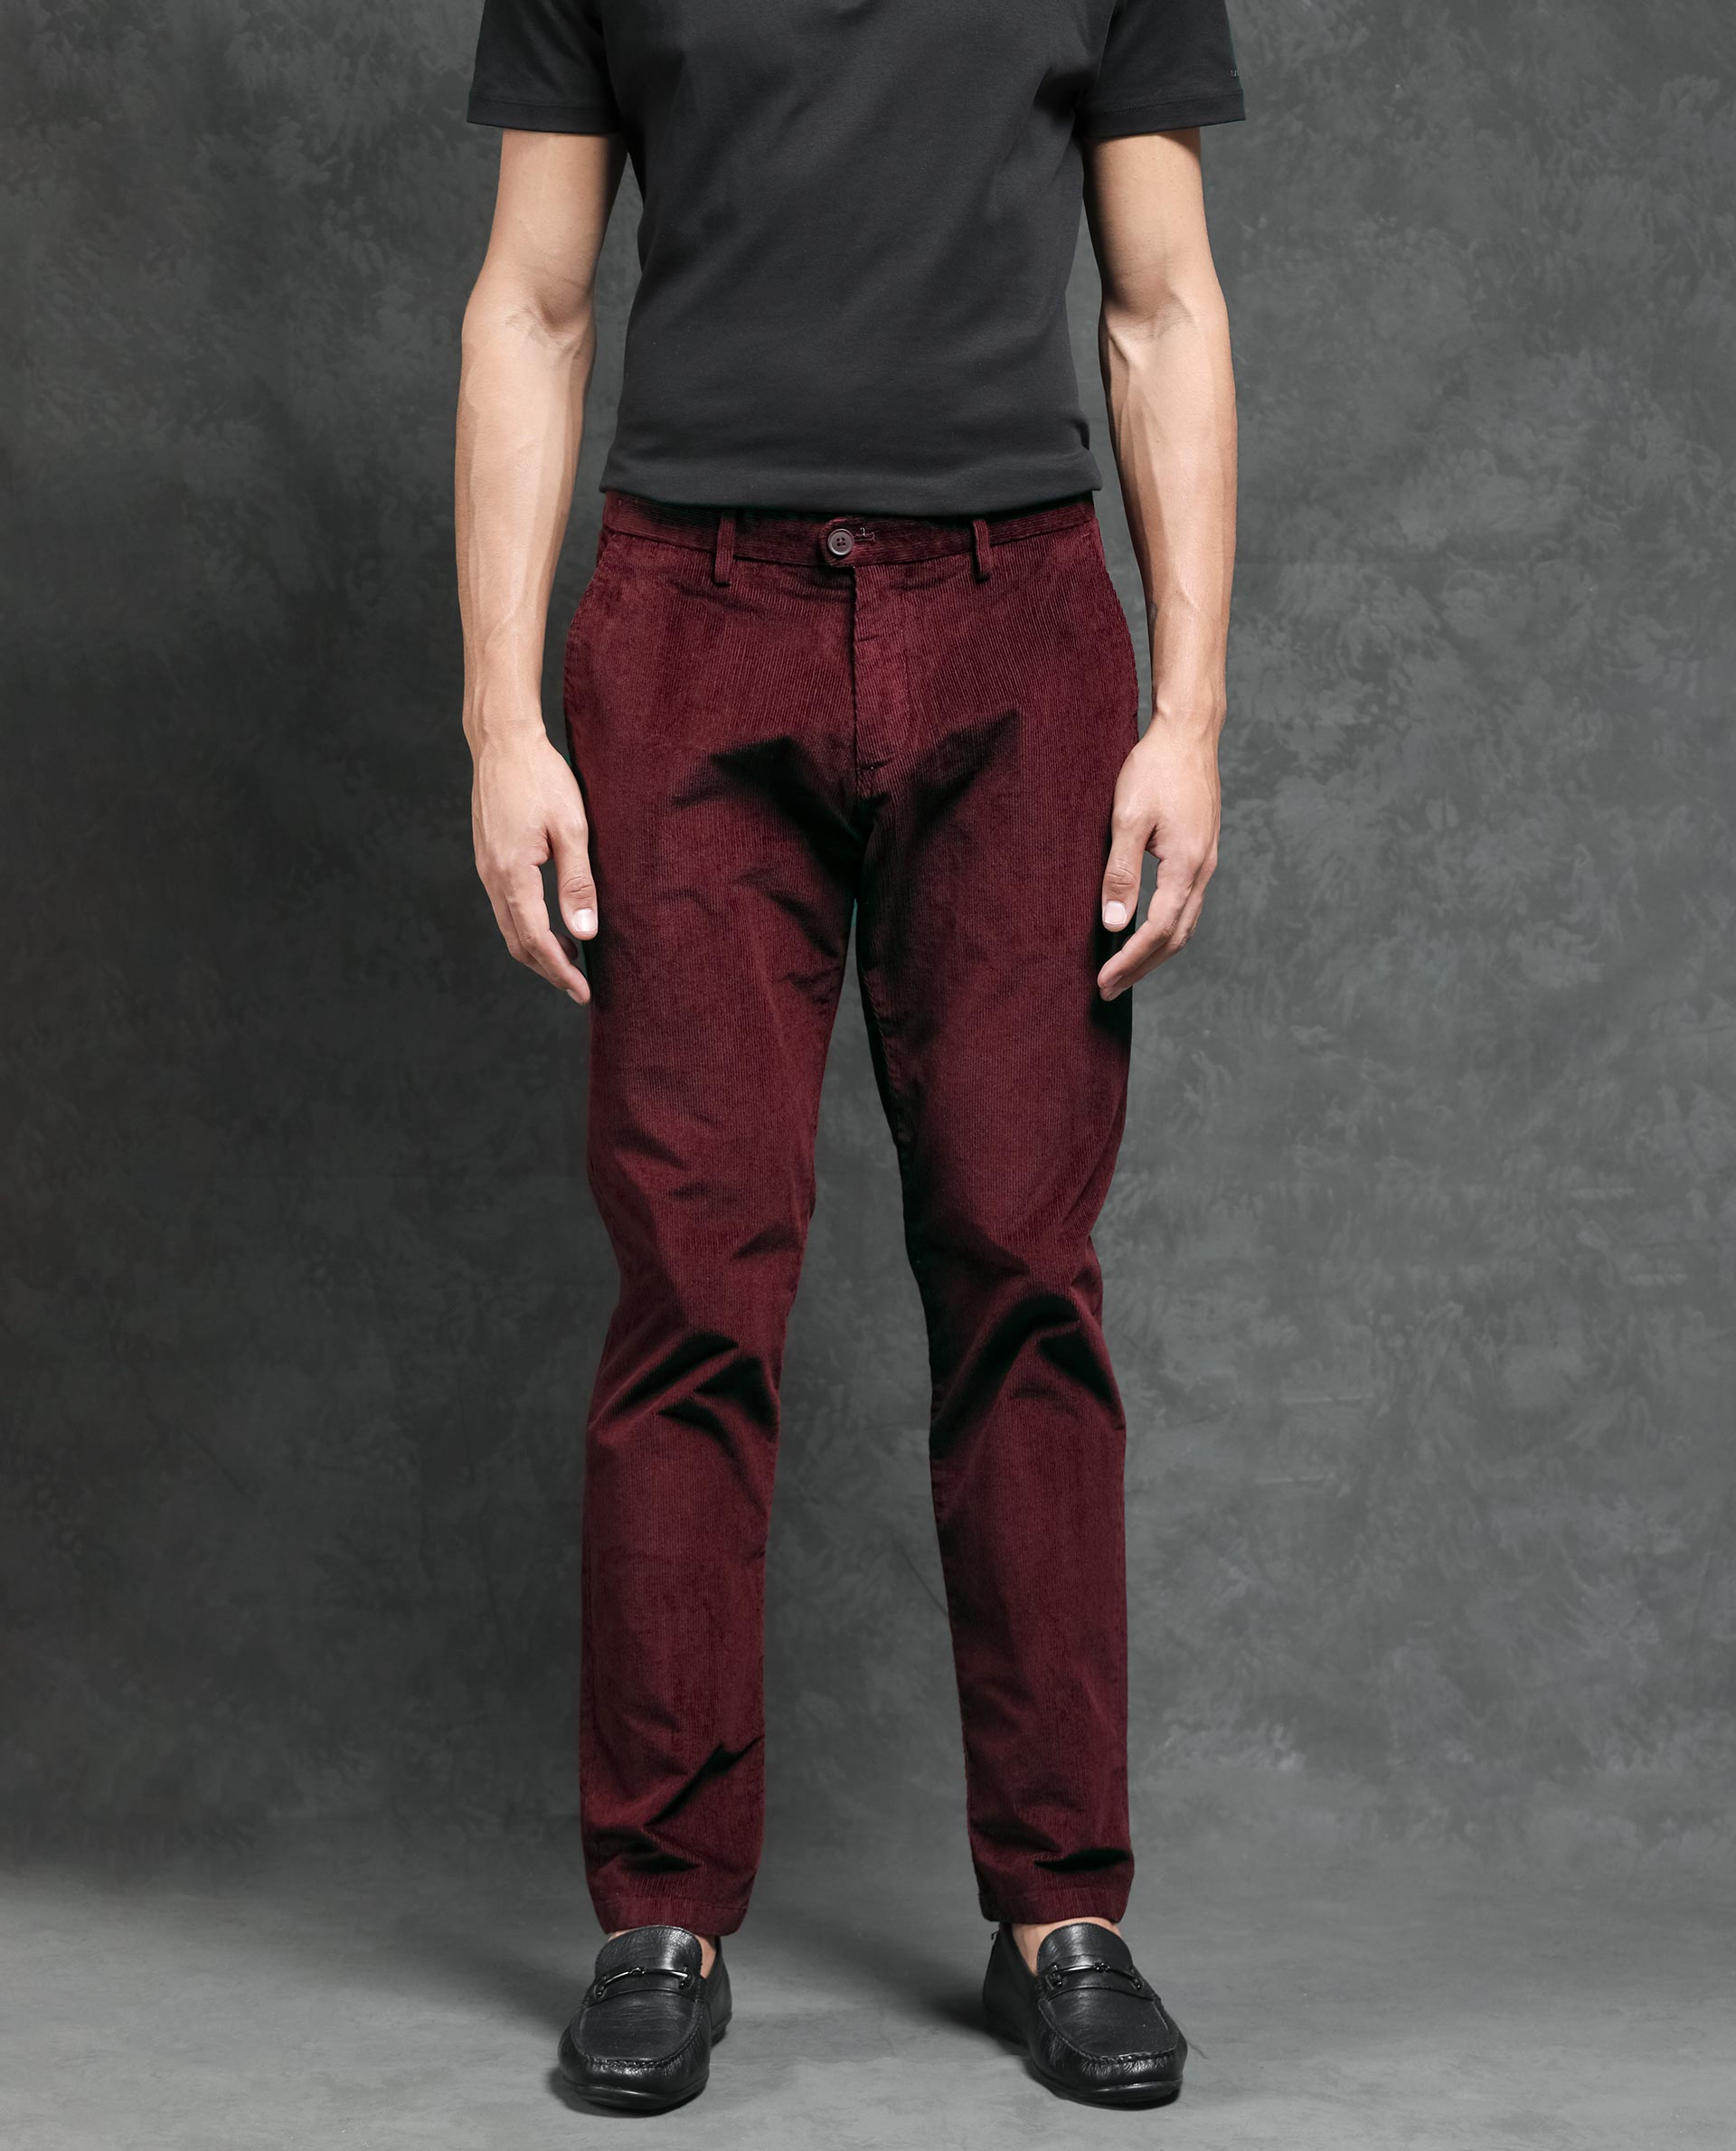 Jeans & Trousers | Global Republic Jeggings | Freeup